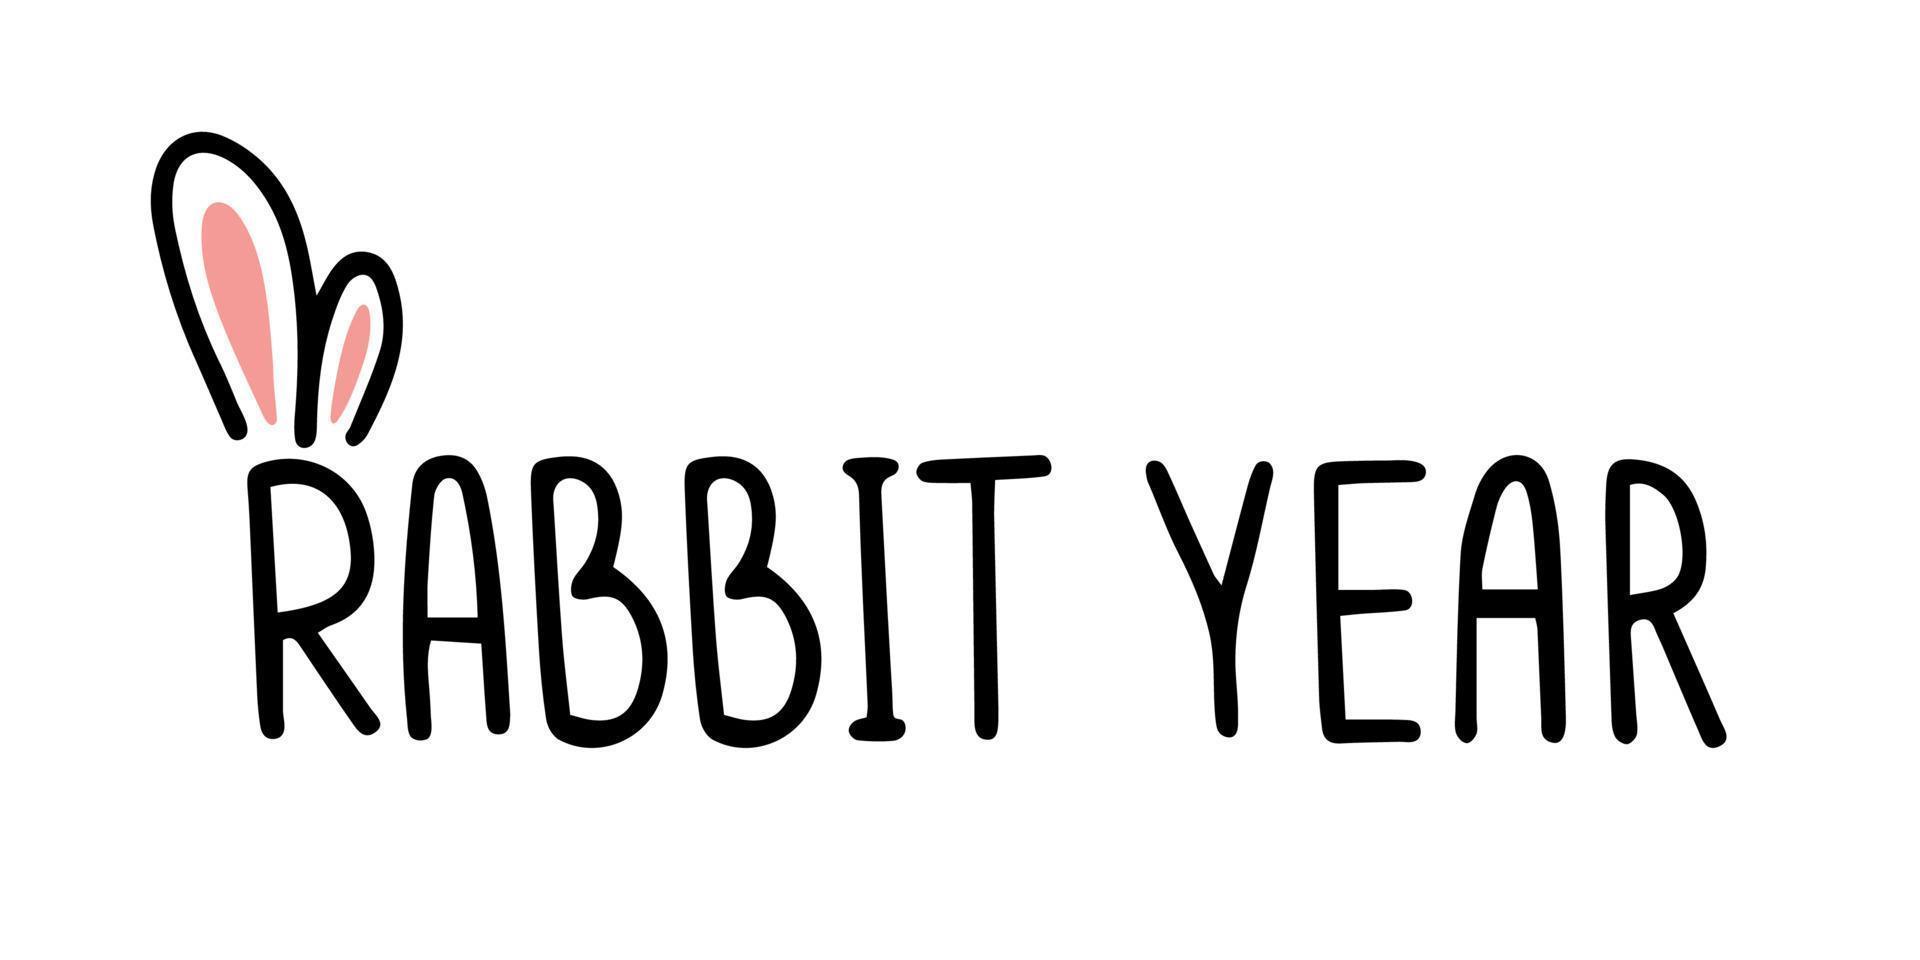 Vector illustration. Handwritten calligraphic brush lettering composition of Rabbit year with bunny ears on white background. For banner and card